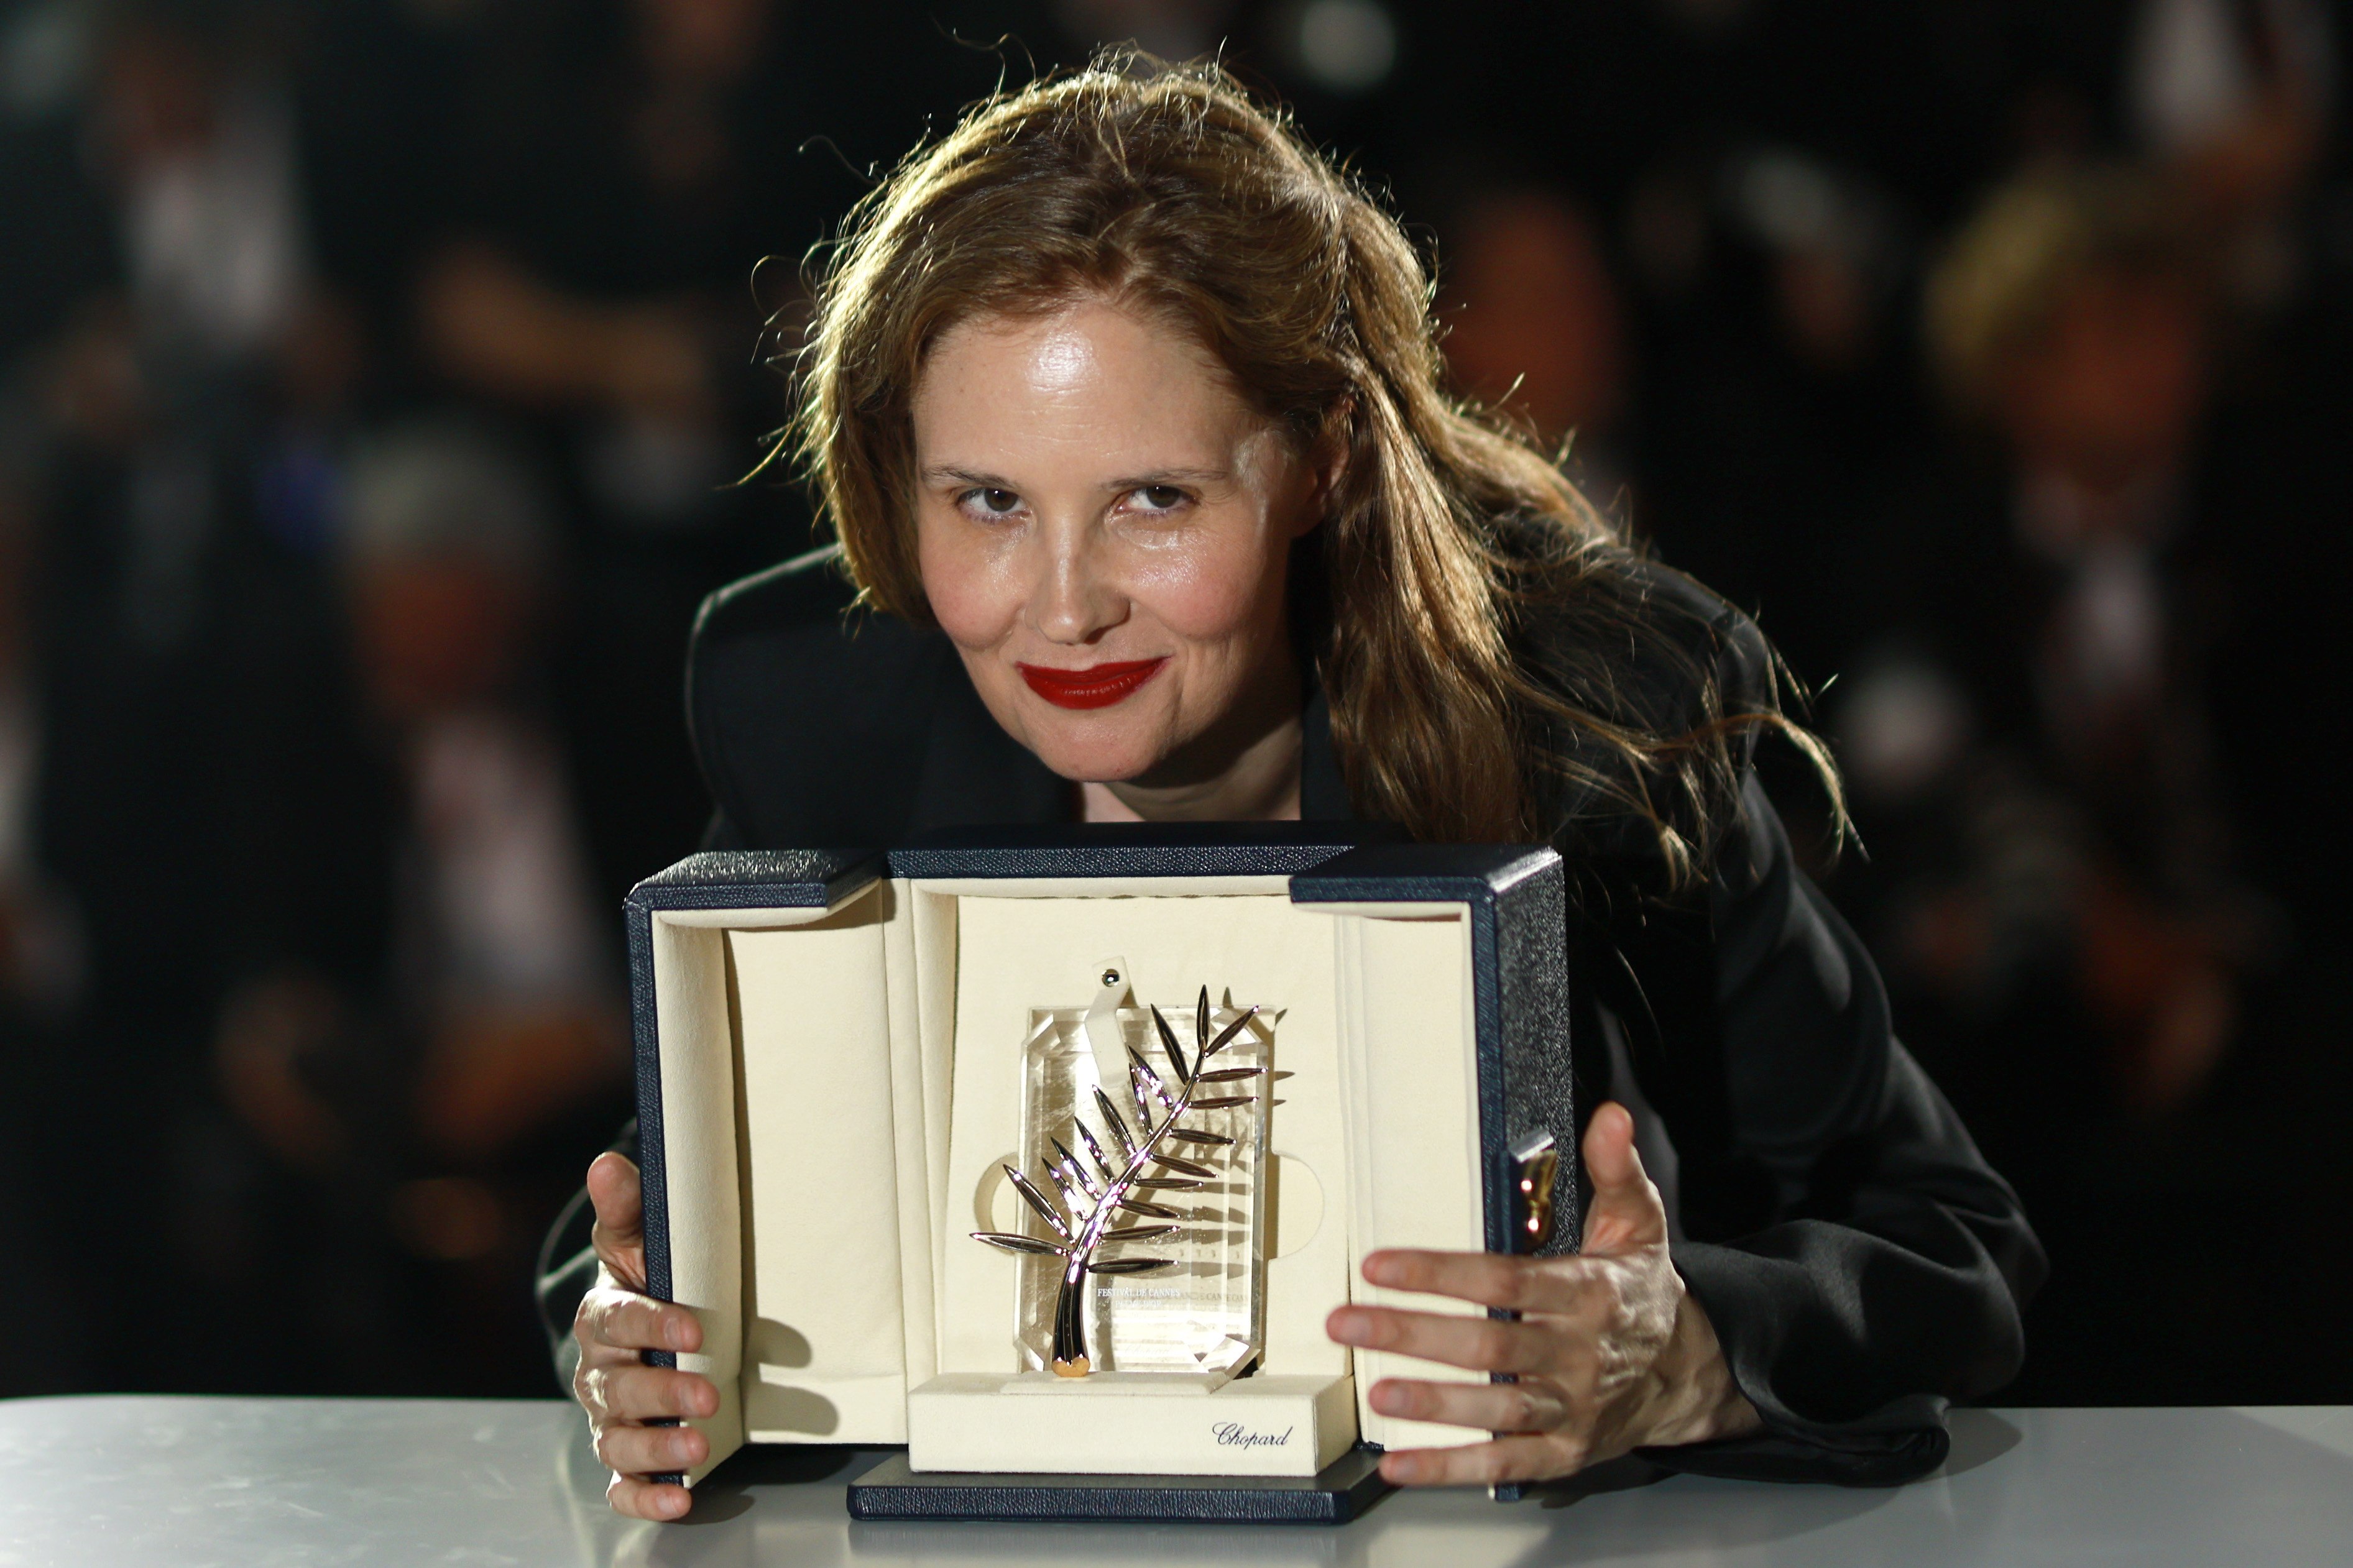 French director Justine Triet, winner of the Palme d’Or for the film Anatomie d’une Chute (Anatomy of a Fall), at the Cannes Film Festival in Cannes, France, on Saturday. Photo: EPA-EFE